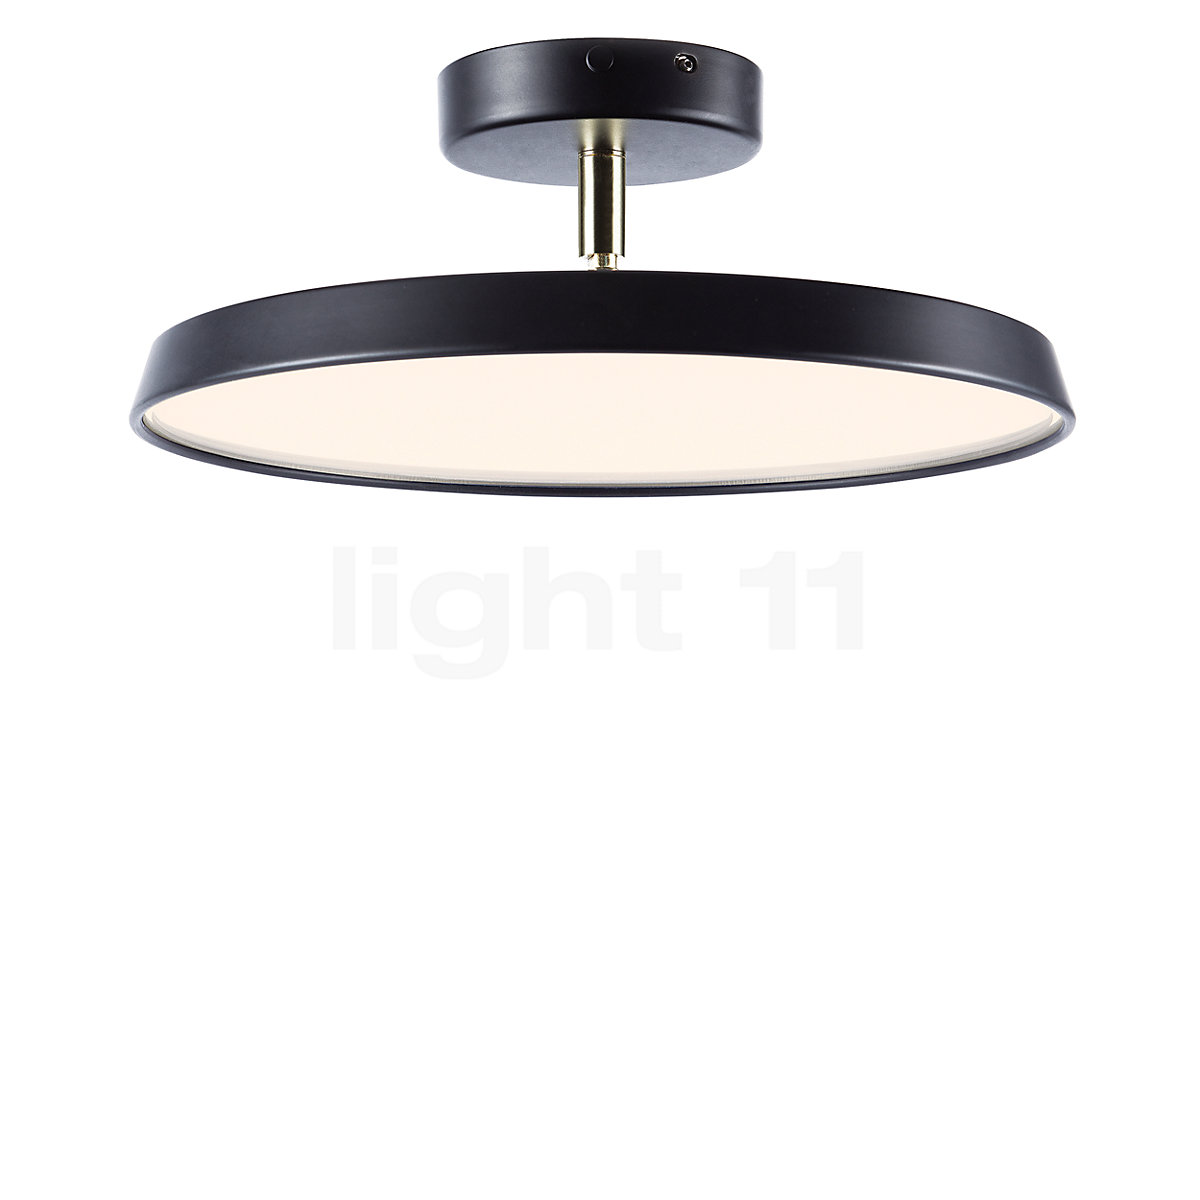 Buy Design at Pro for People LED Kaito Ceiling the Light